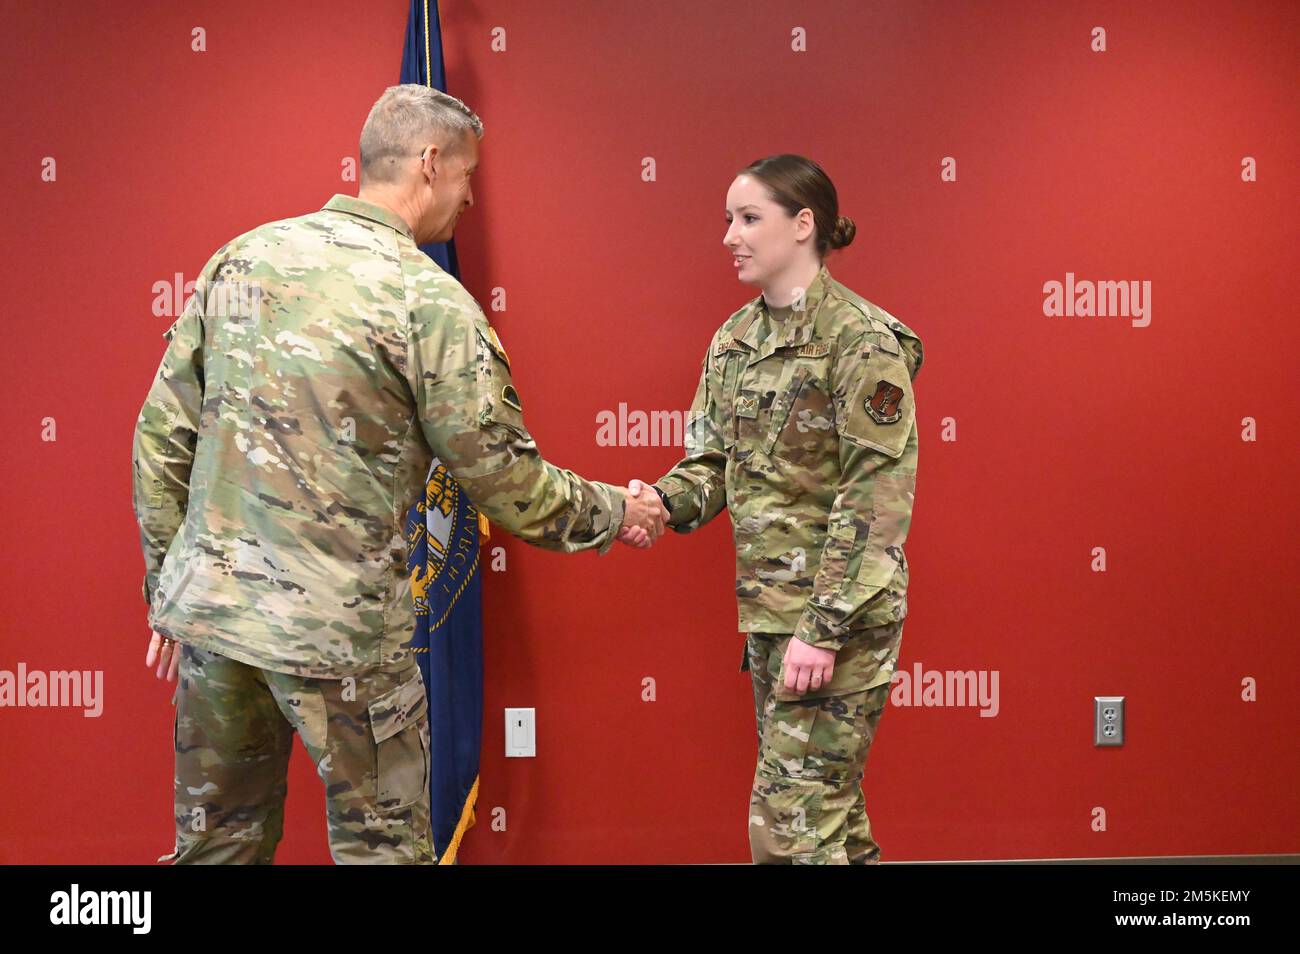 General Daniel Hokanson, Chief, National Guard Bureau, presents a coin to Senior Airman Casey Englebart, combat crew communications specialist of the 155th Operations Support Staff, on March 22, 2022, at the Lincoln air force base, Nebraksa.  Hokanson visited with senior leaders, Airmen, and Soldiers of the Nebraska National Guard. Stock Photo